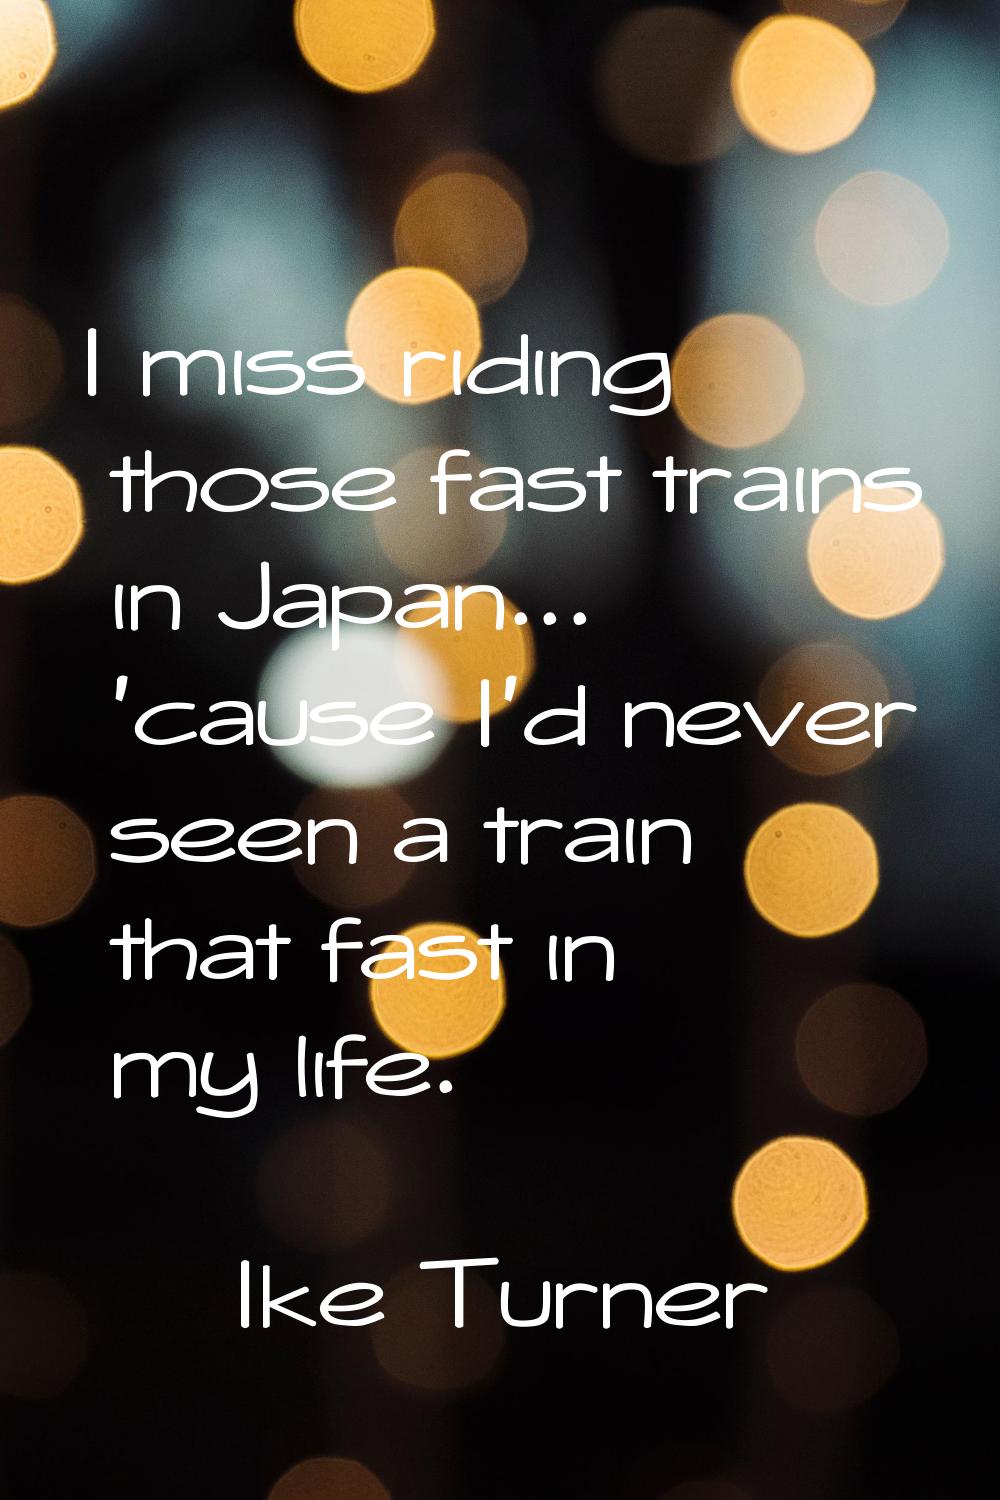 I miss riding those fast trains in Japan... 'cause I'd never seen a train that fast in my life.